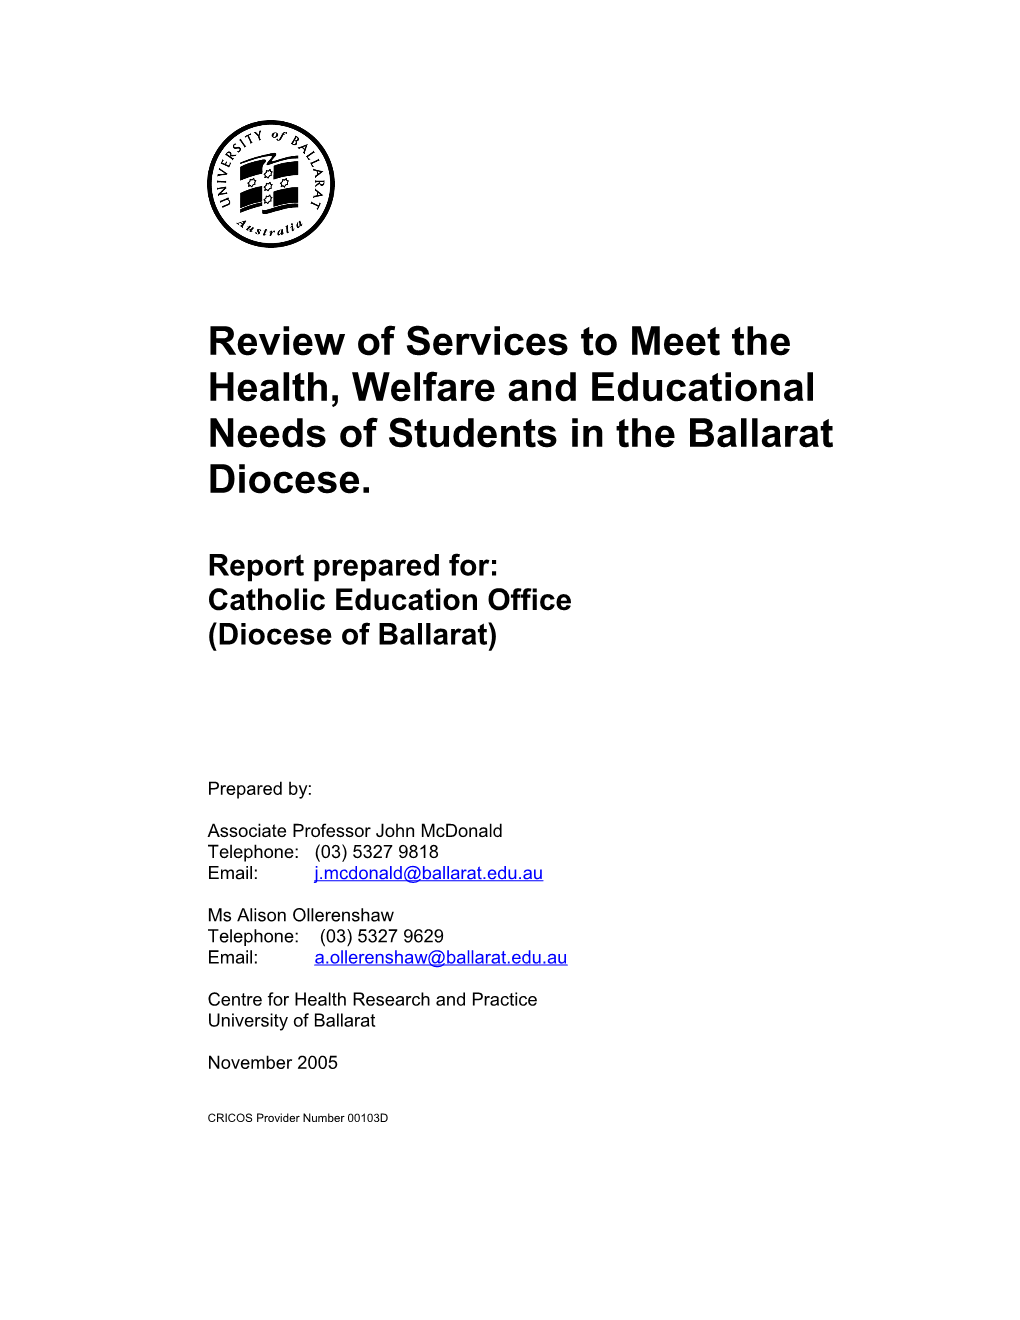 Review of Services to Meet the Health, Welfare and Educational Needs of Students in The